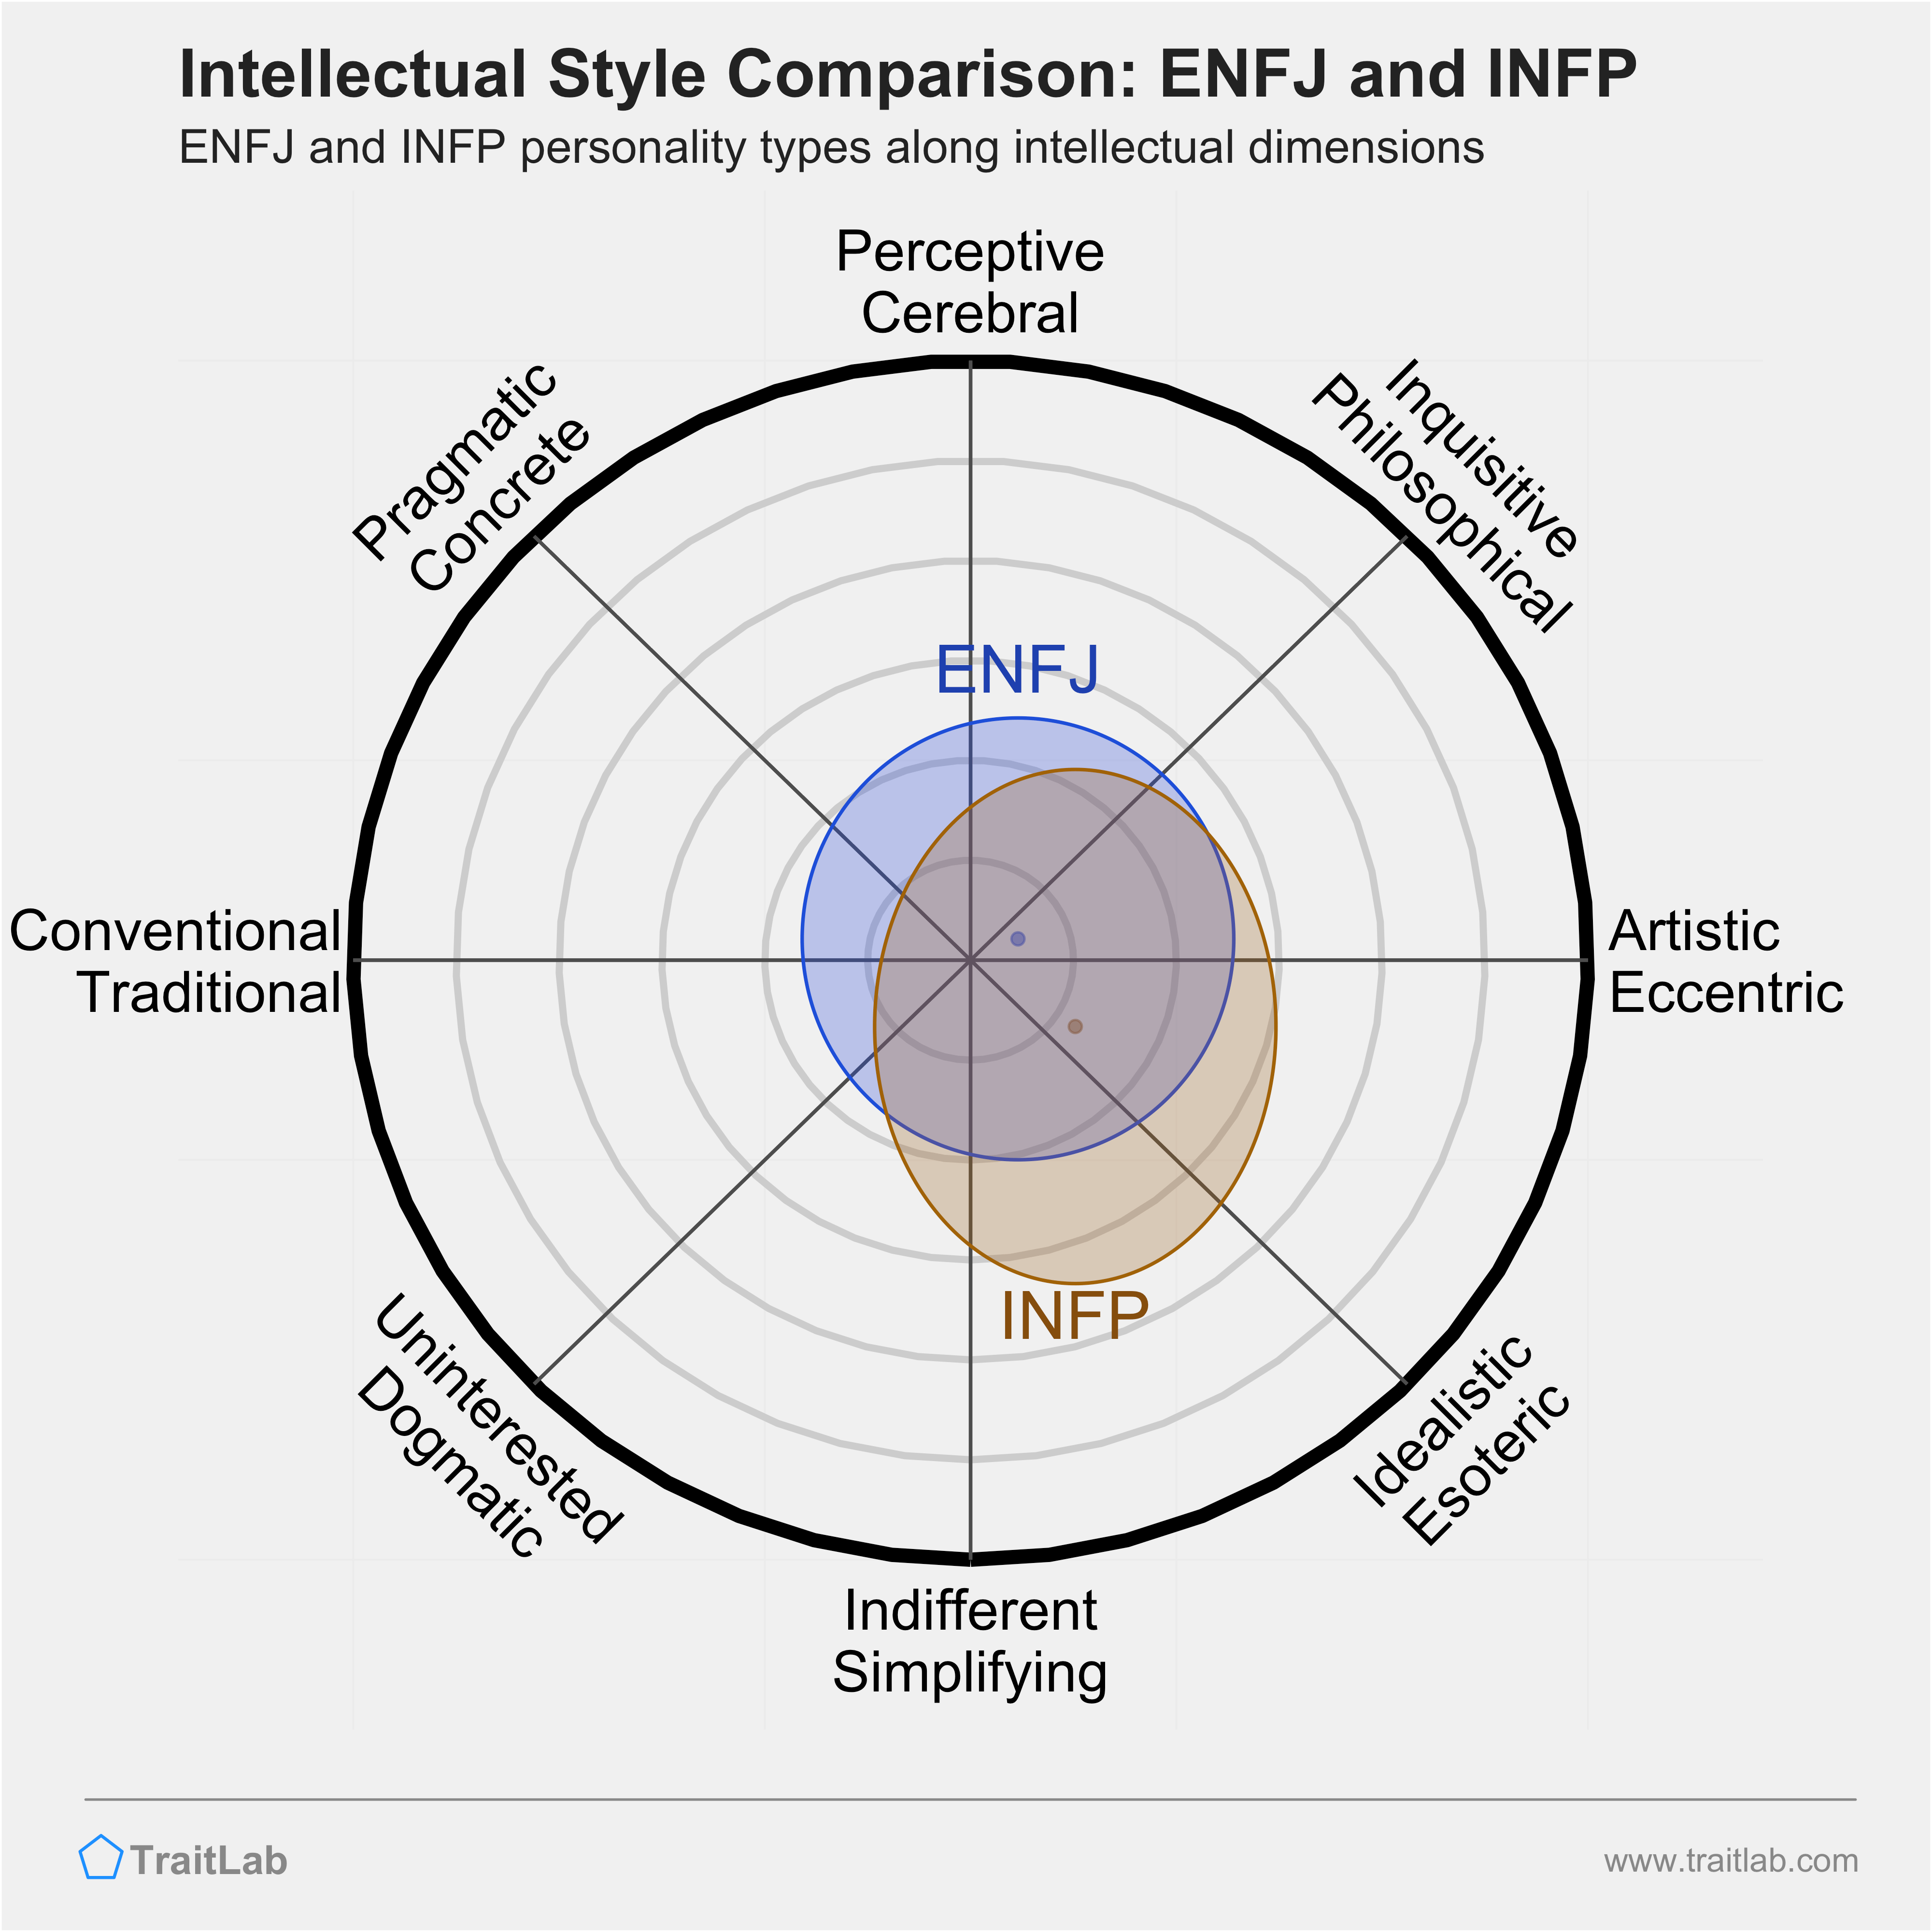 ENFJ and INFP comparison across intellectual dimensions